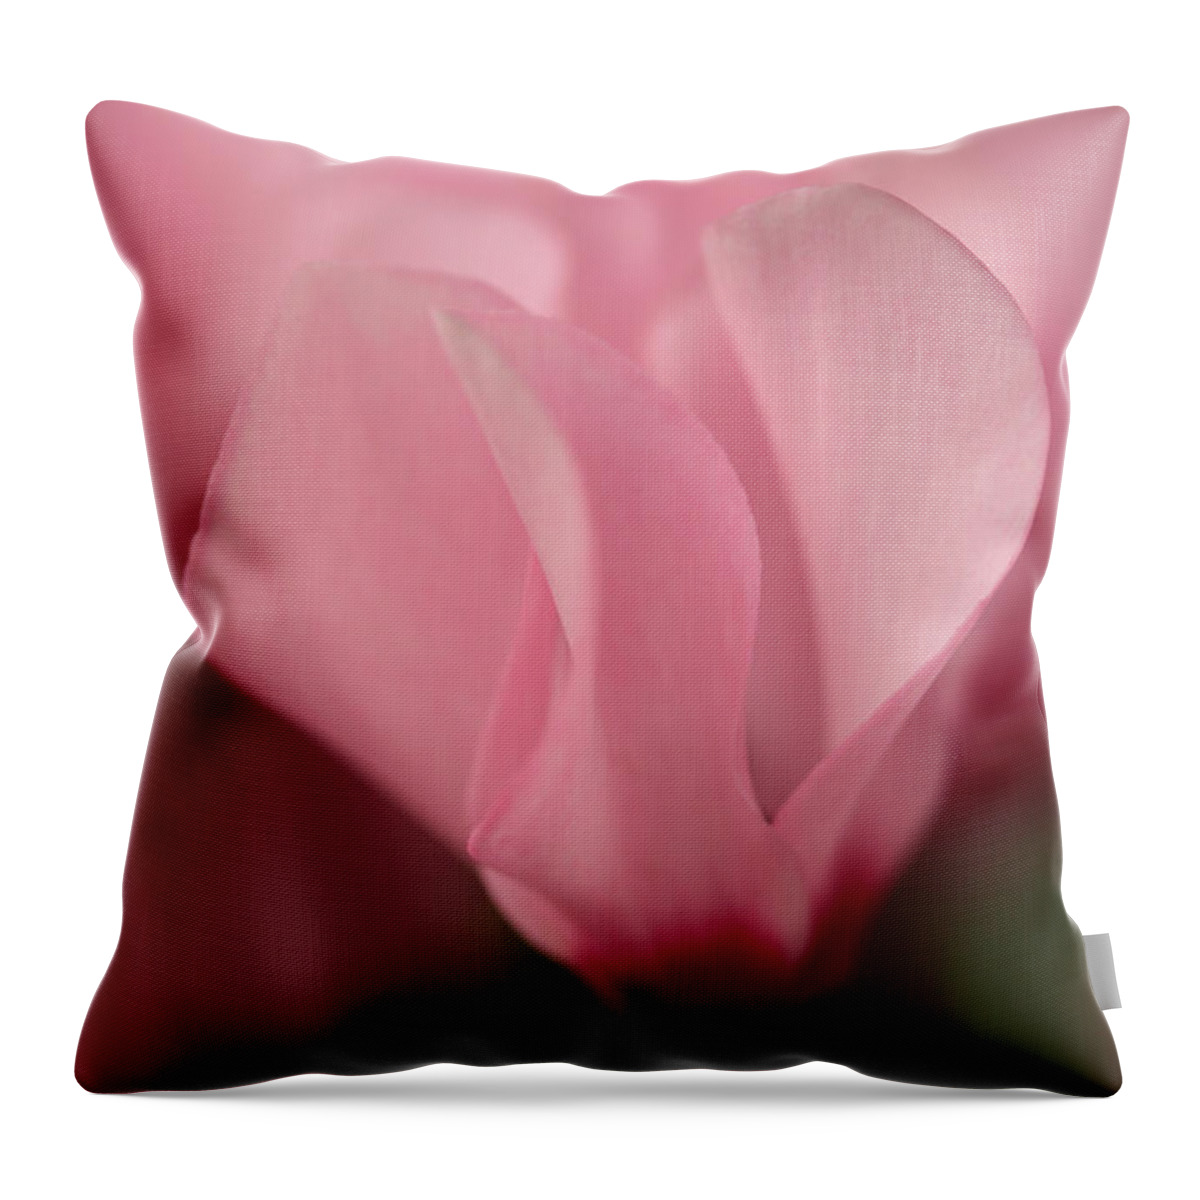 Connie Handscomb Throw Pillow featuring the photograph Meltdown by Connie Handscomb